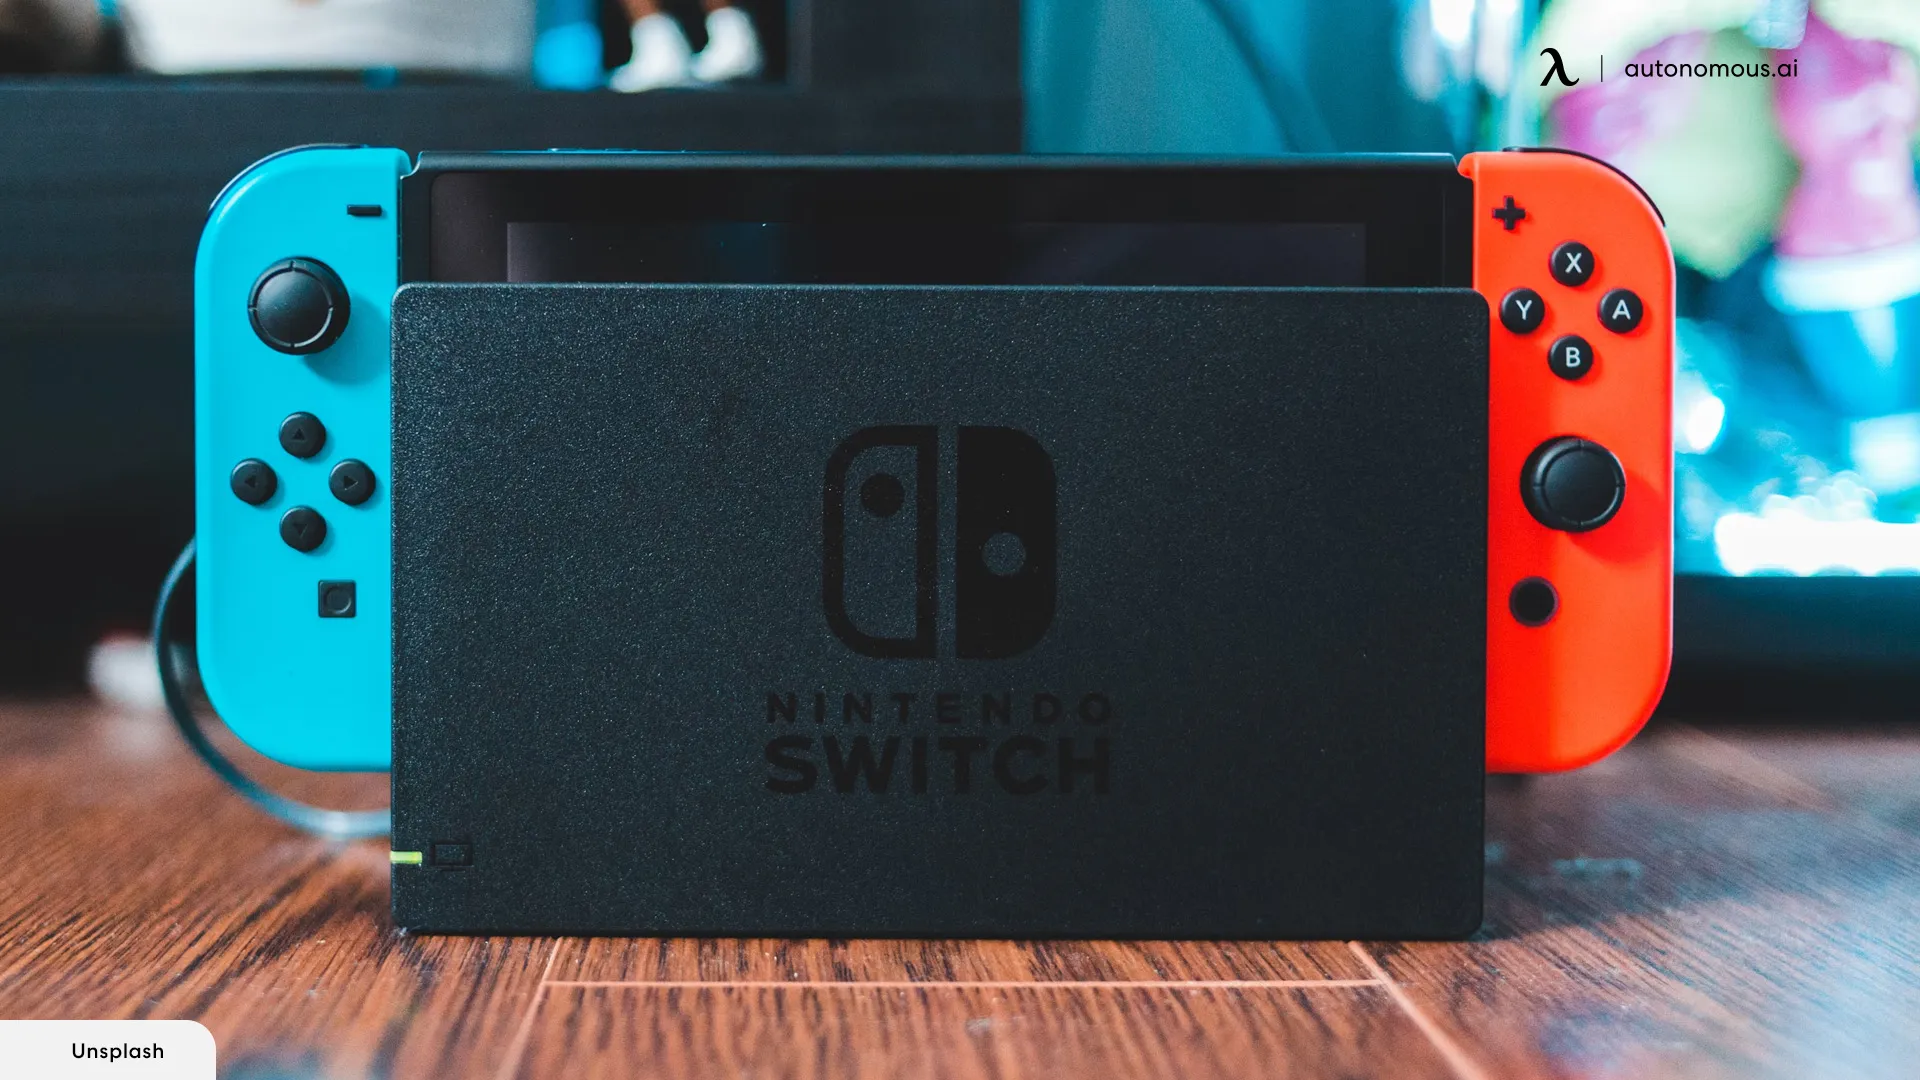 Step 6: Put your Nintendo Switch in the Dock